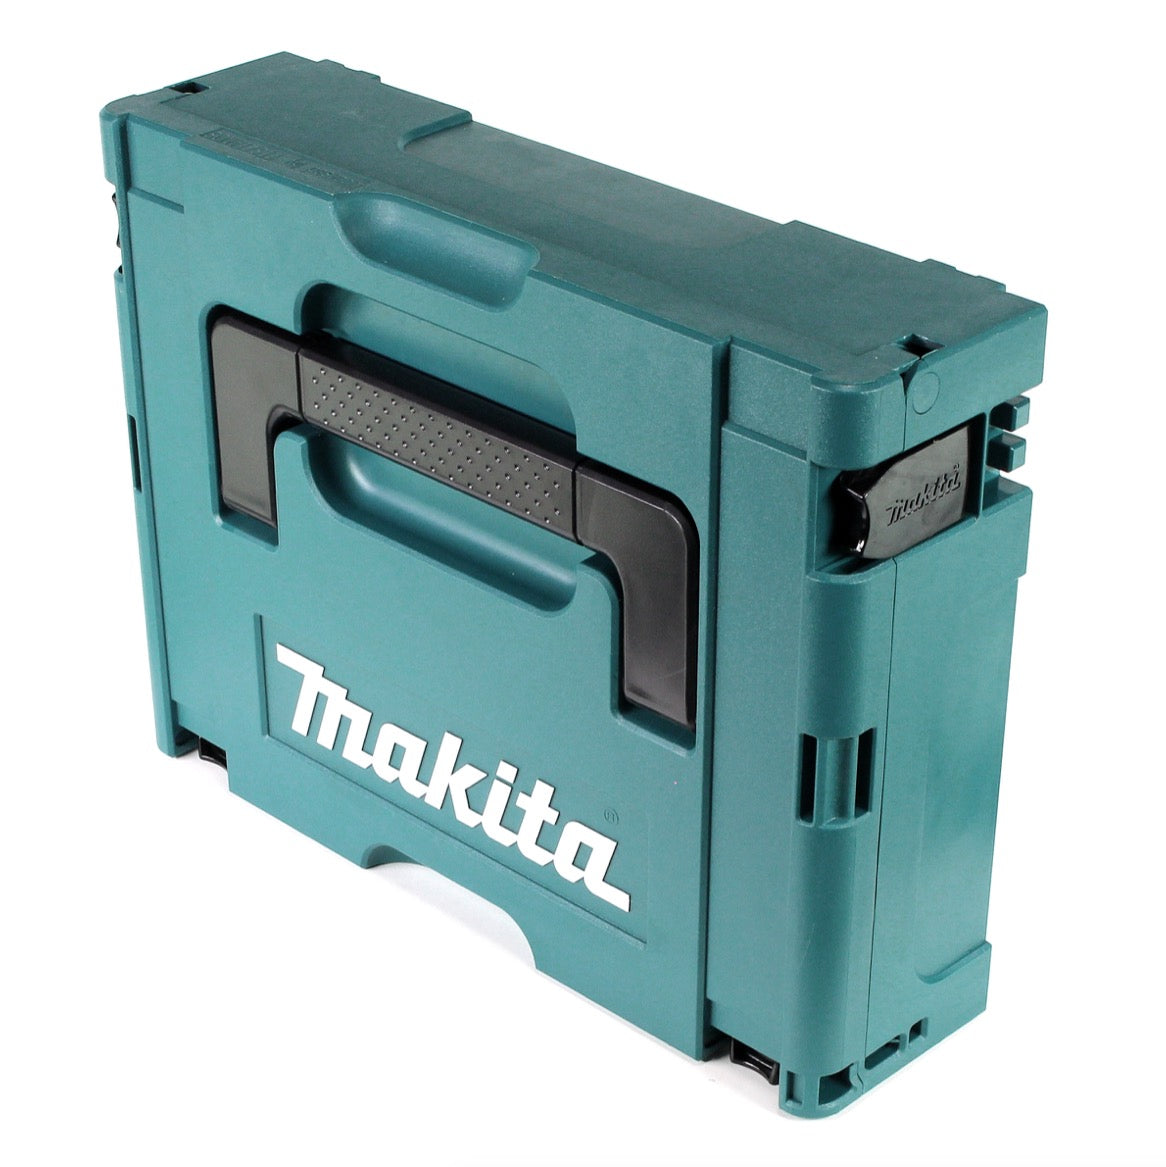 Makita MAKPAC 1 Systemkoffer - ohne Einlage - Toolbrothers